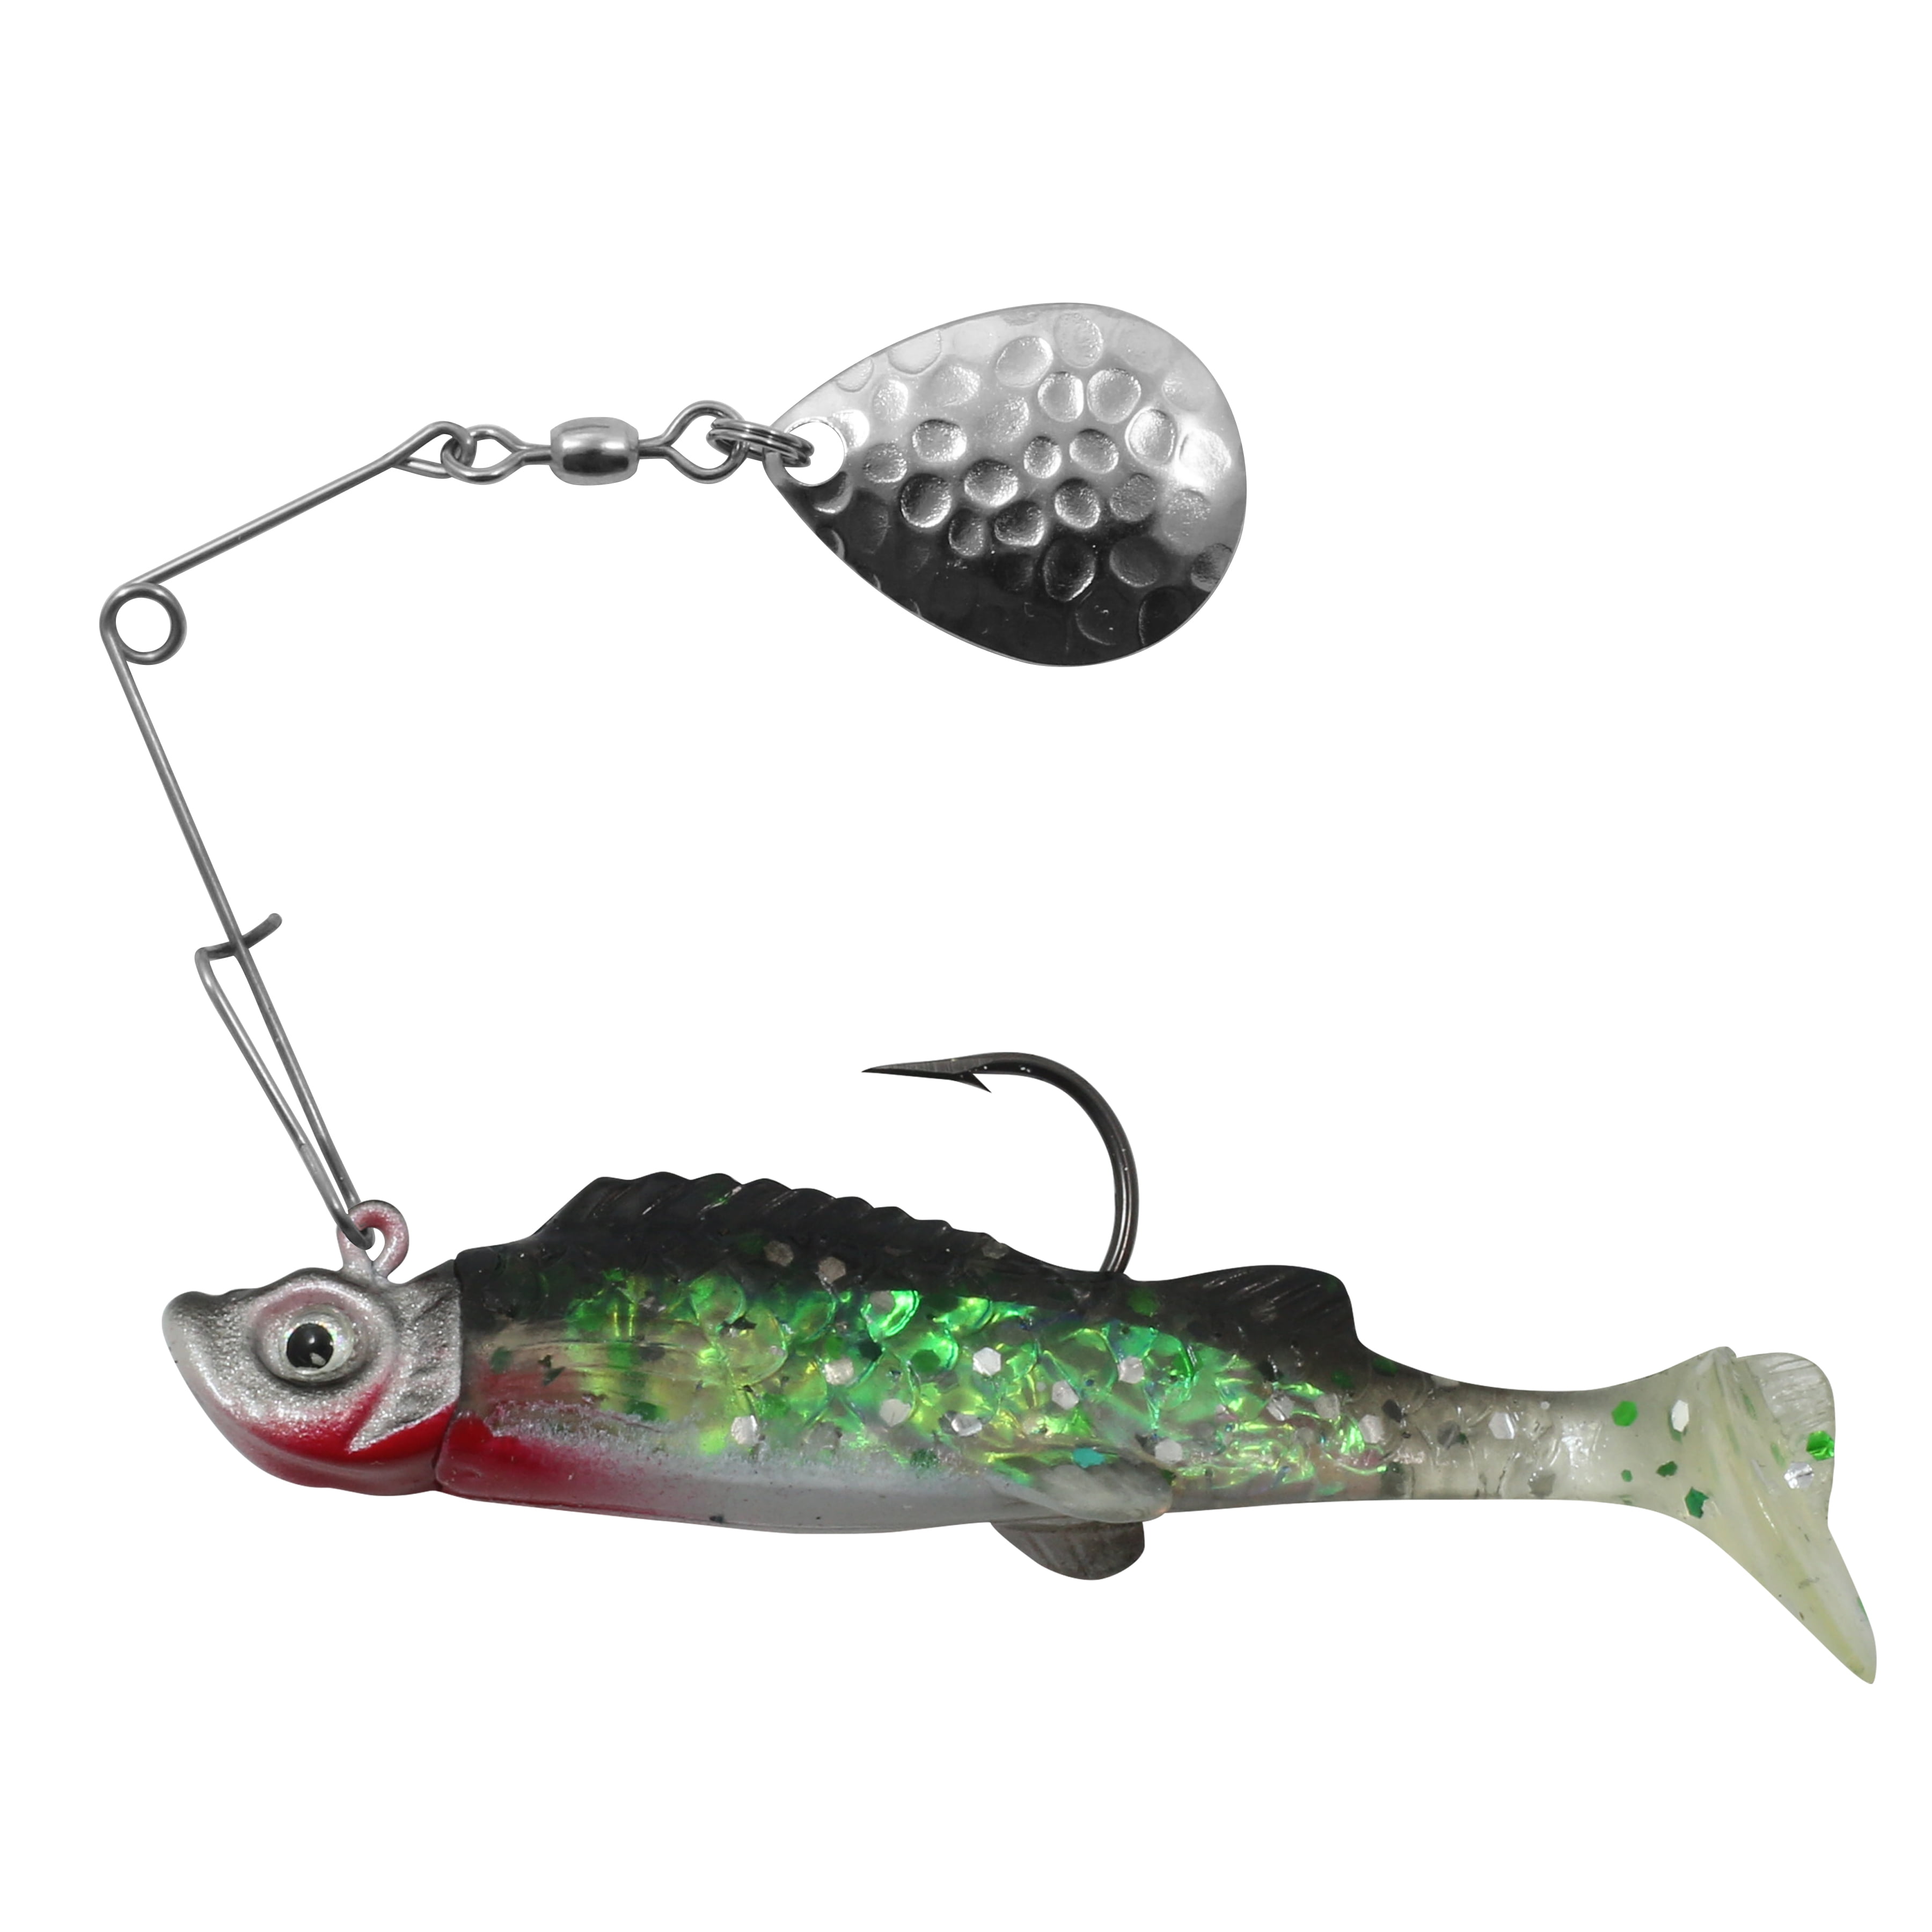 Northland Tackle Mimic Minnow Spin, Spinner Jig and Tail